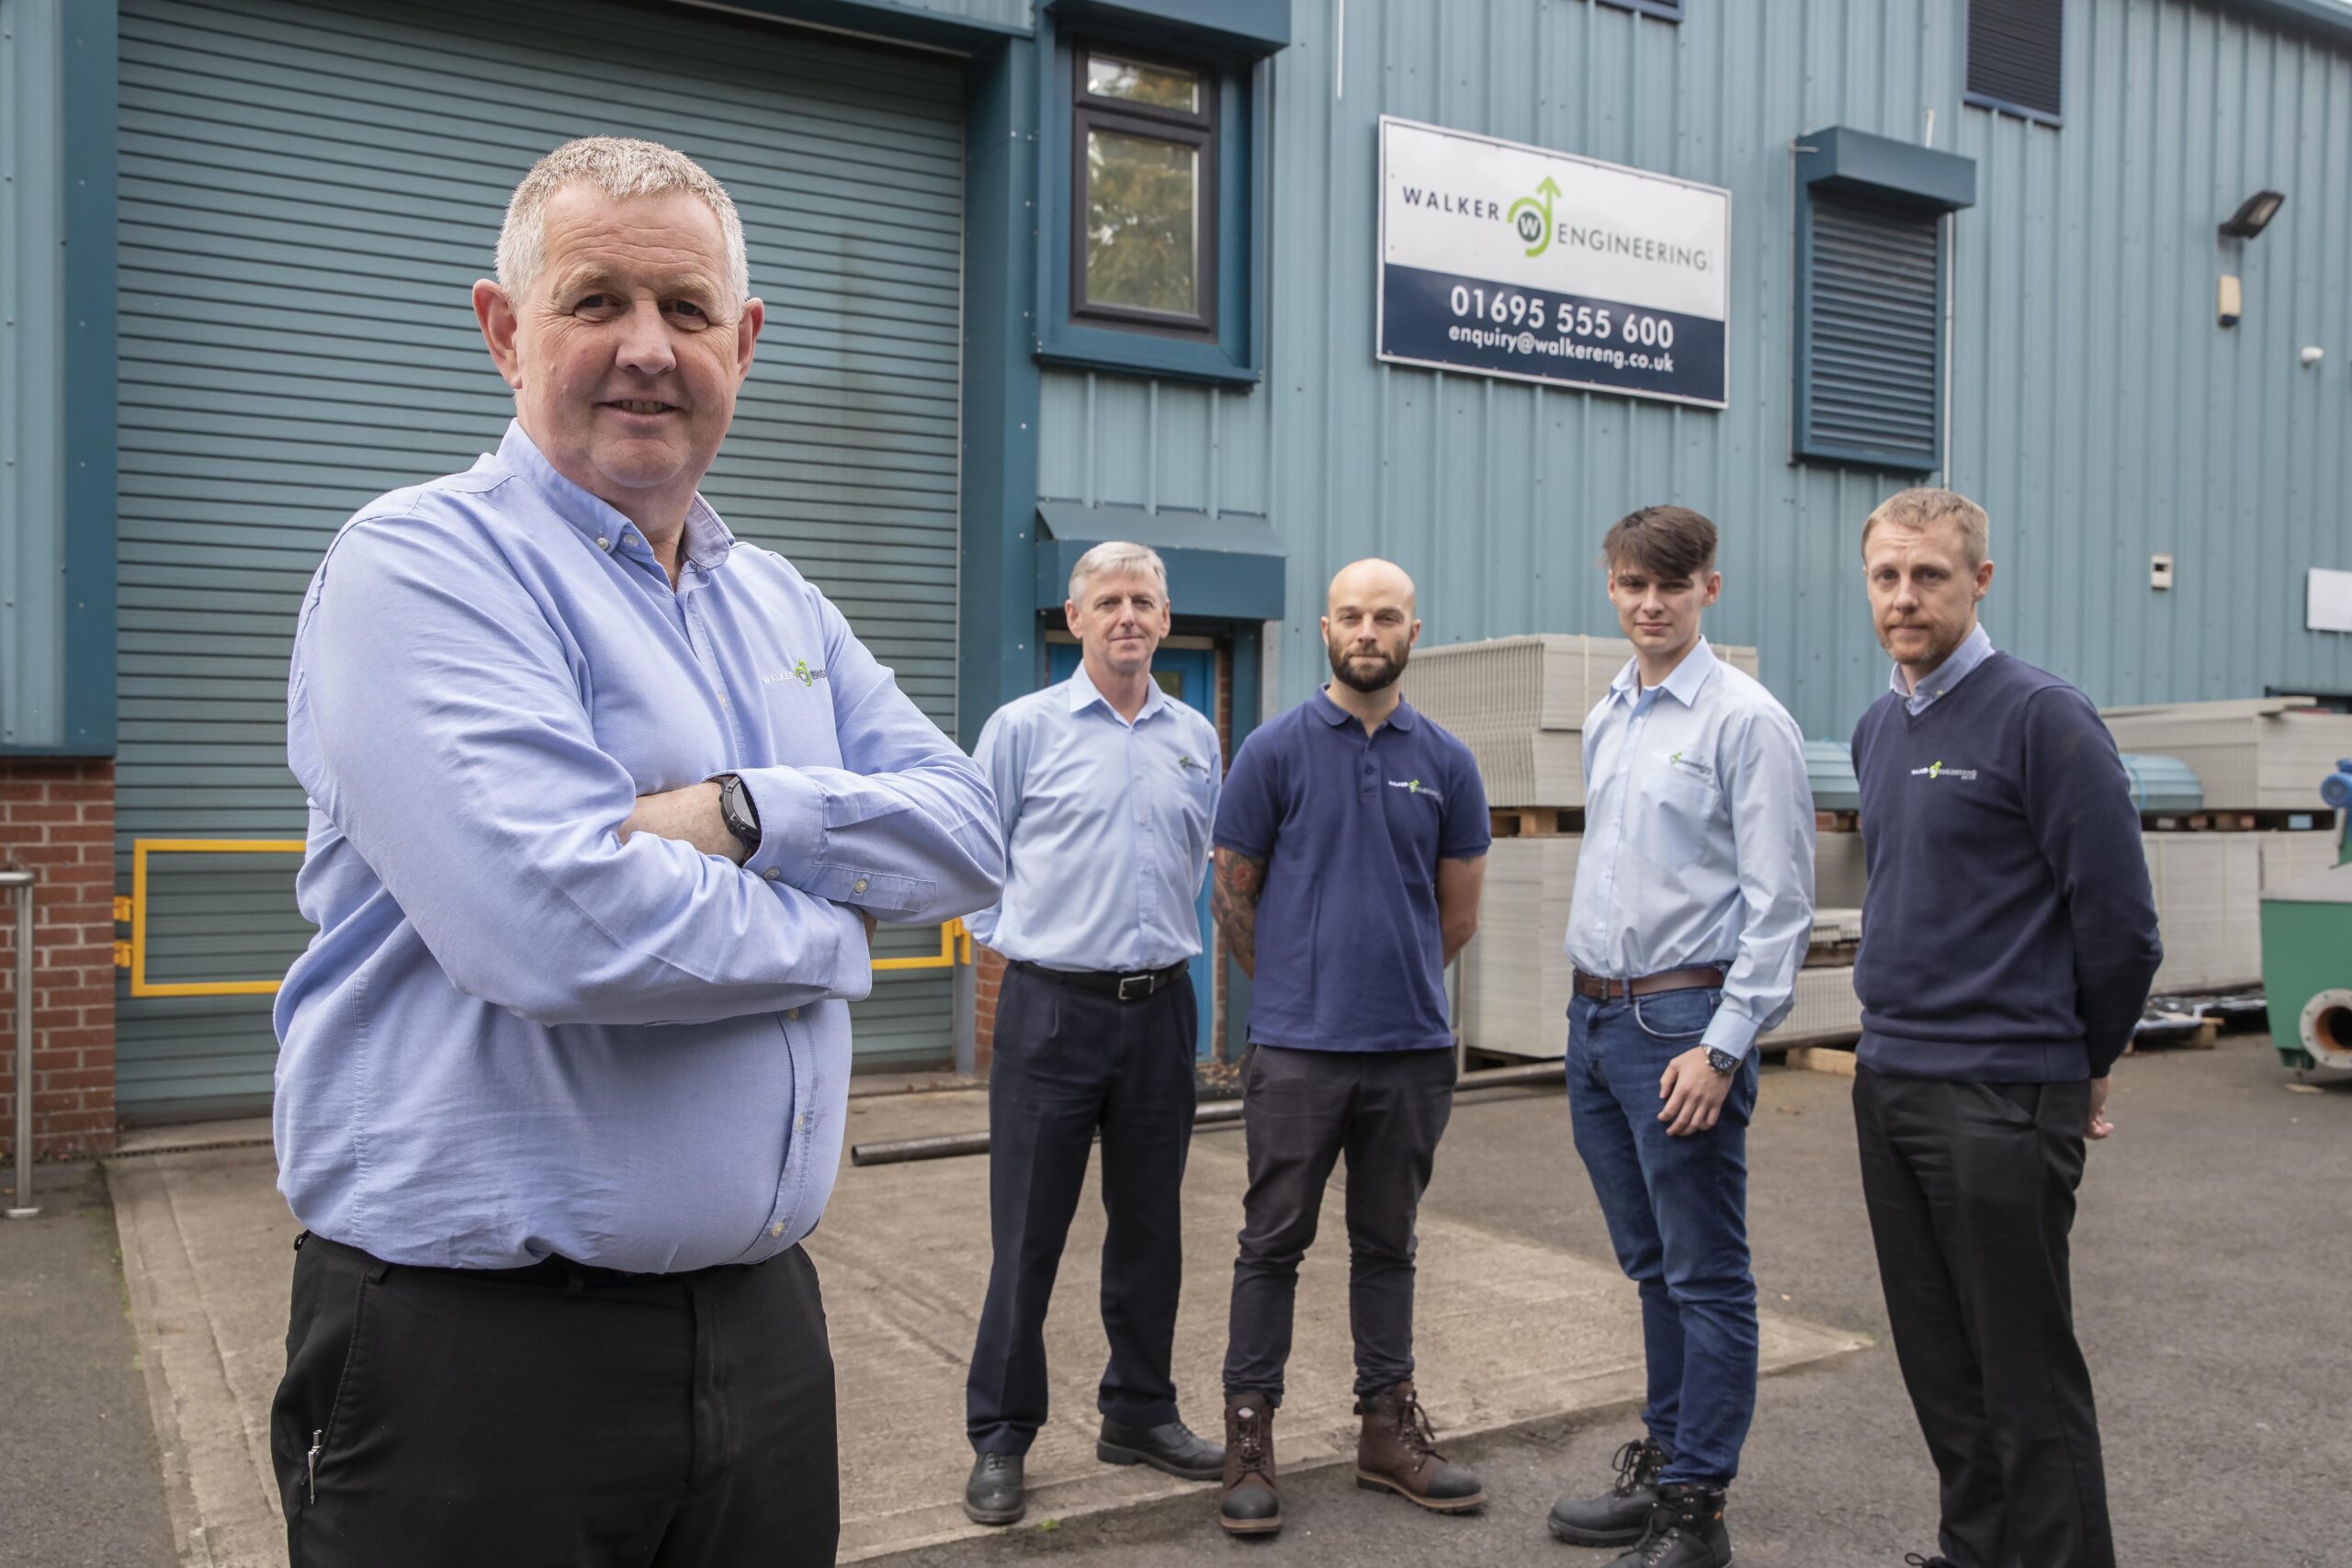 Record financial year for North West engineering company Walker Engineering